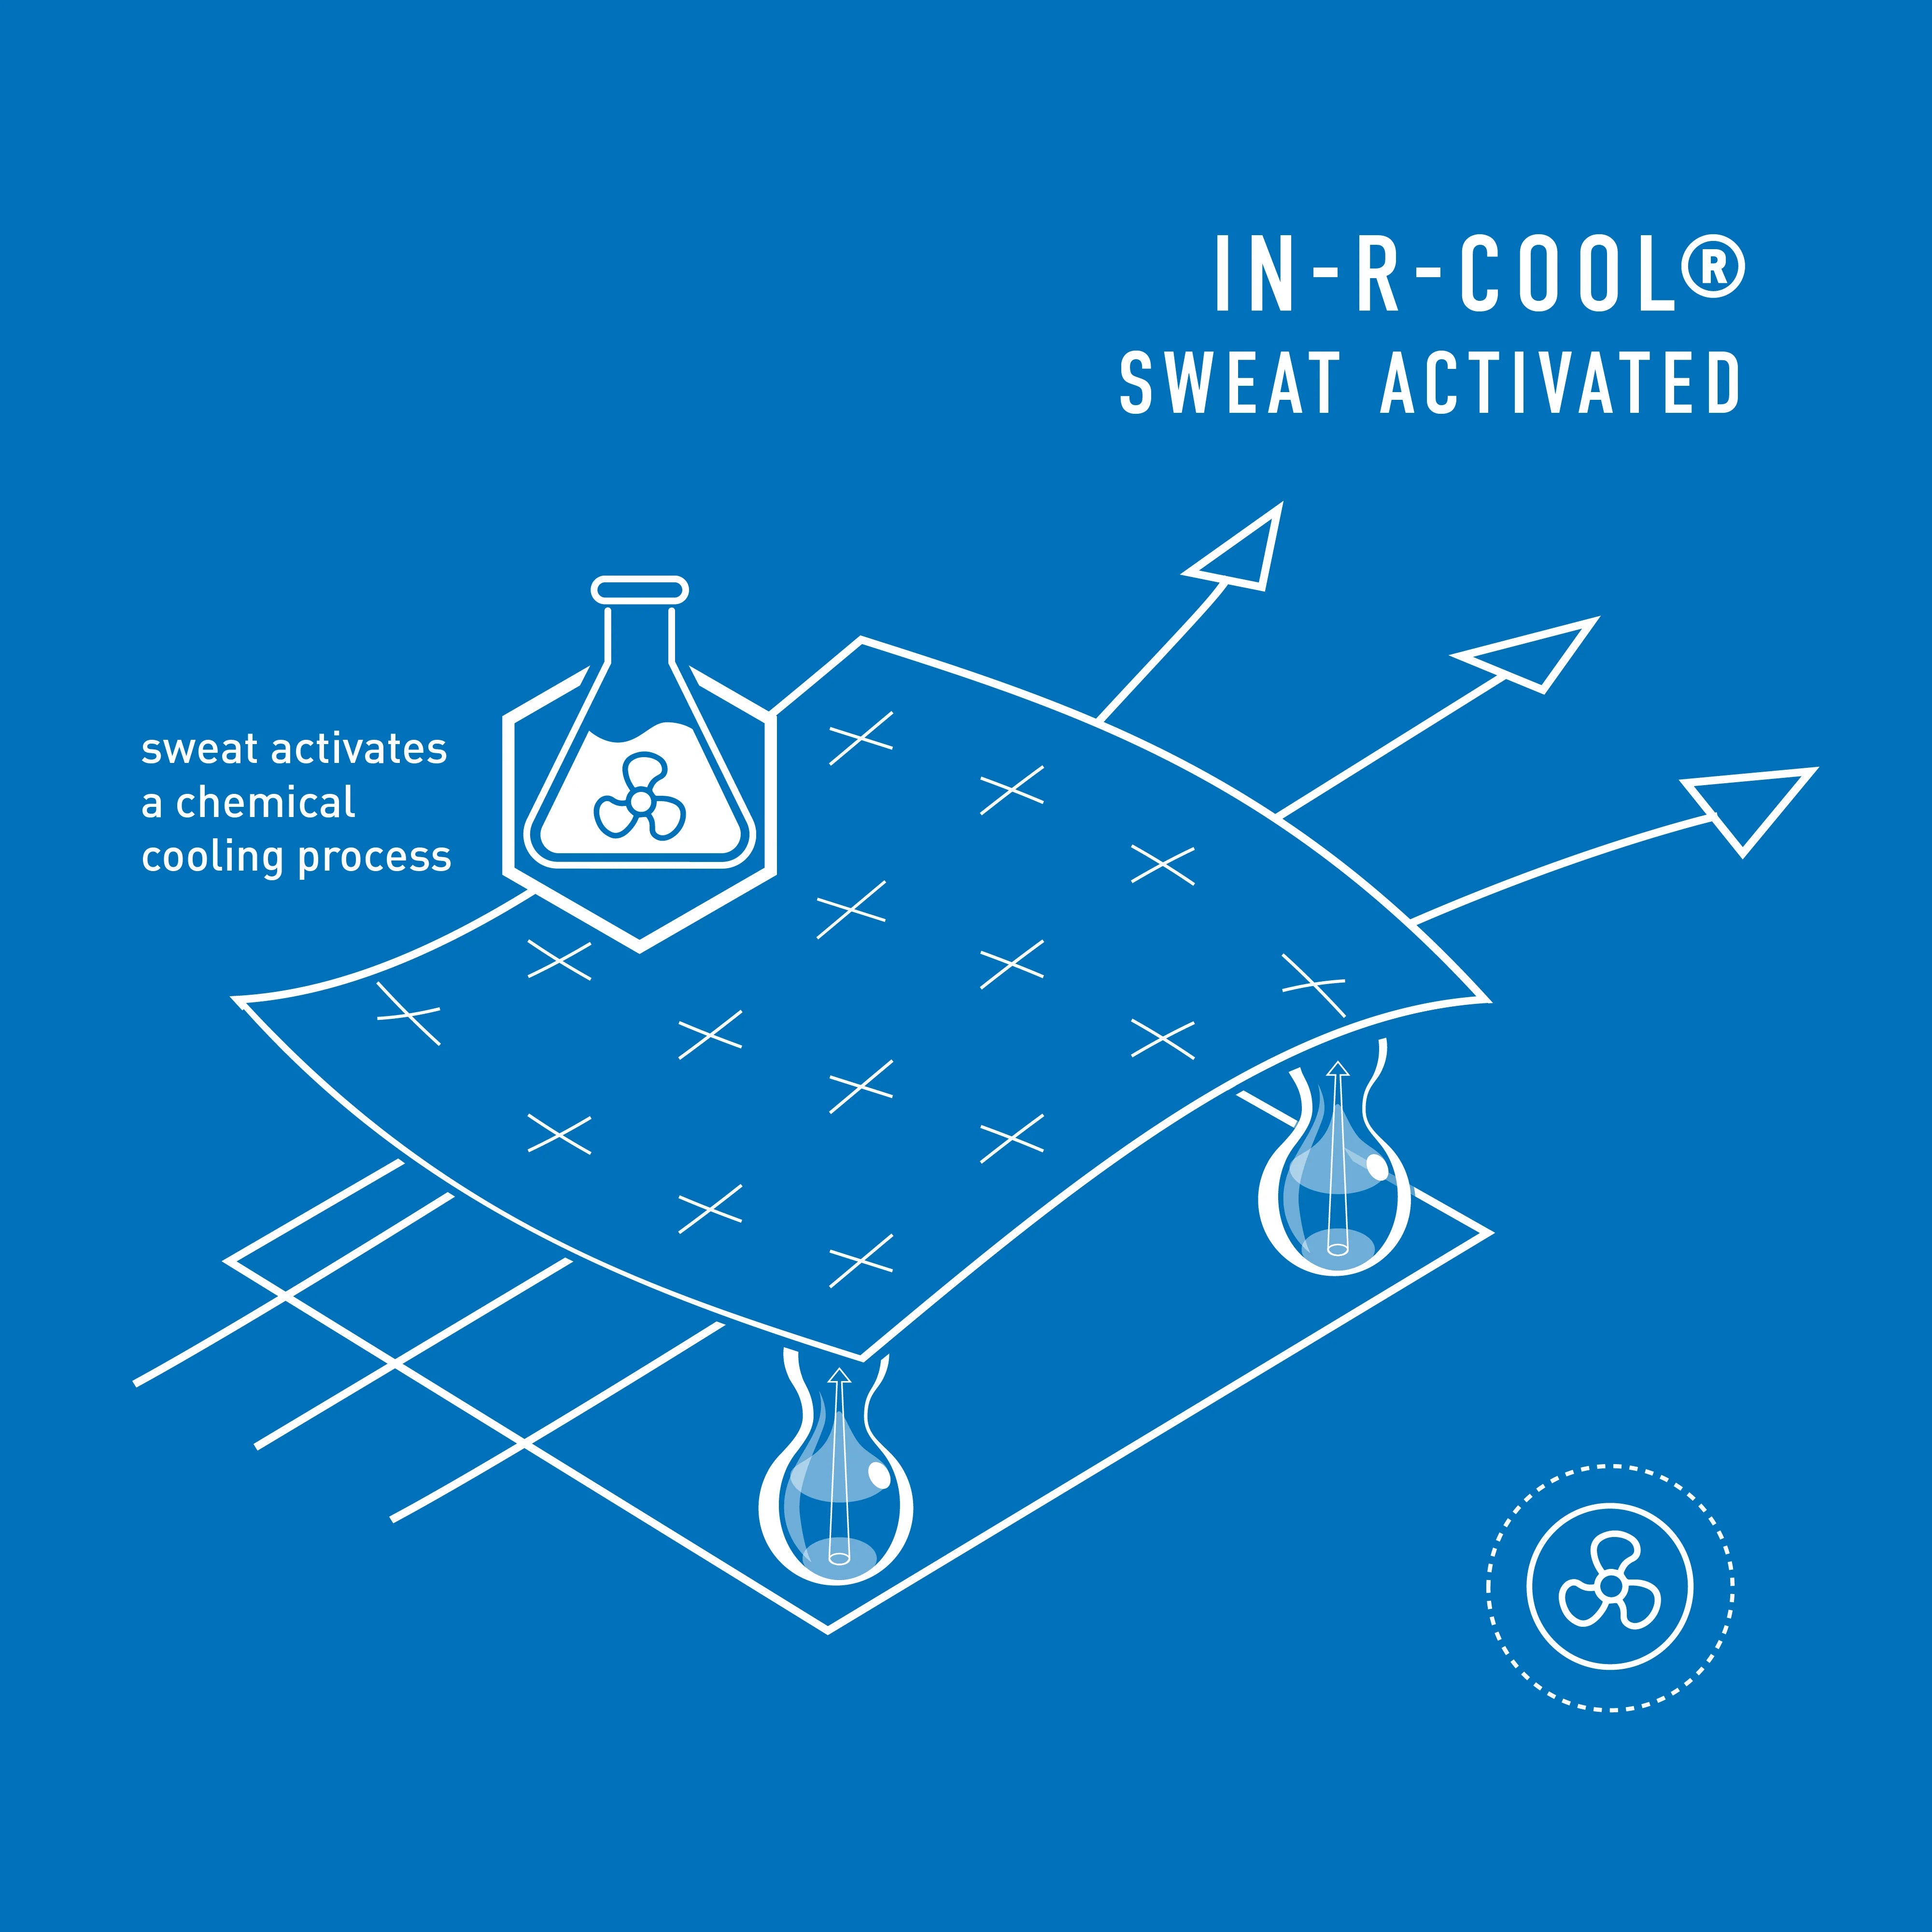 In-R-Cool Sweat Activated